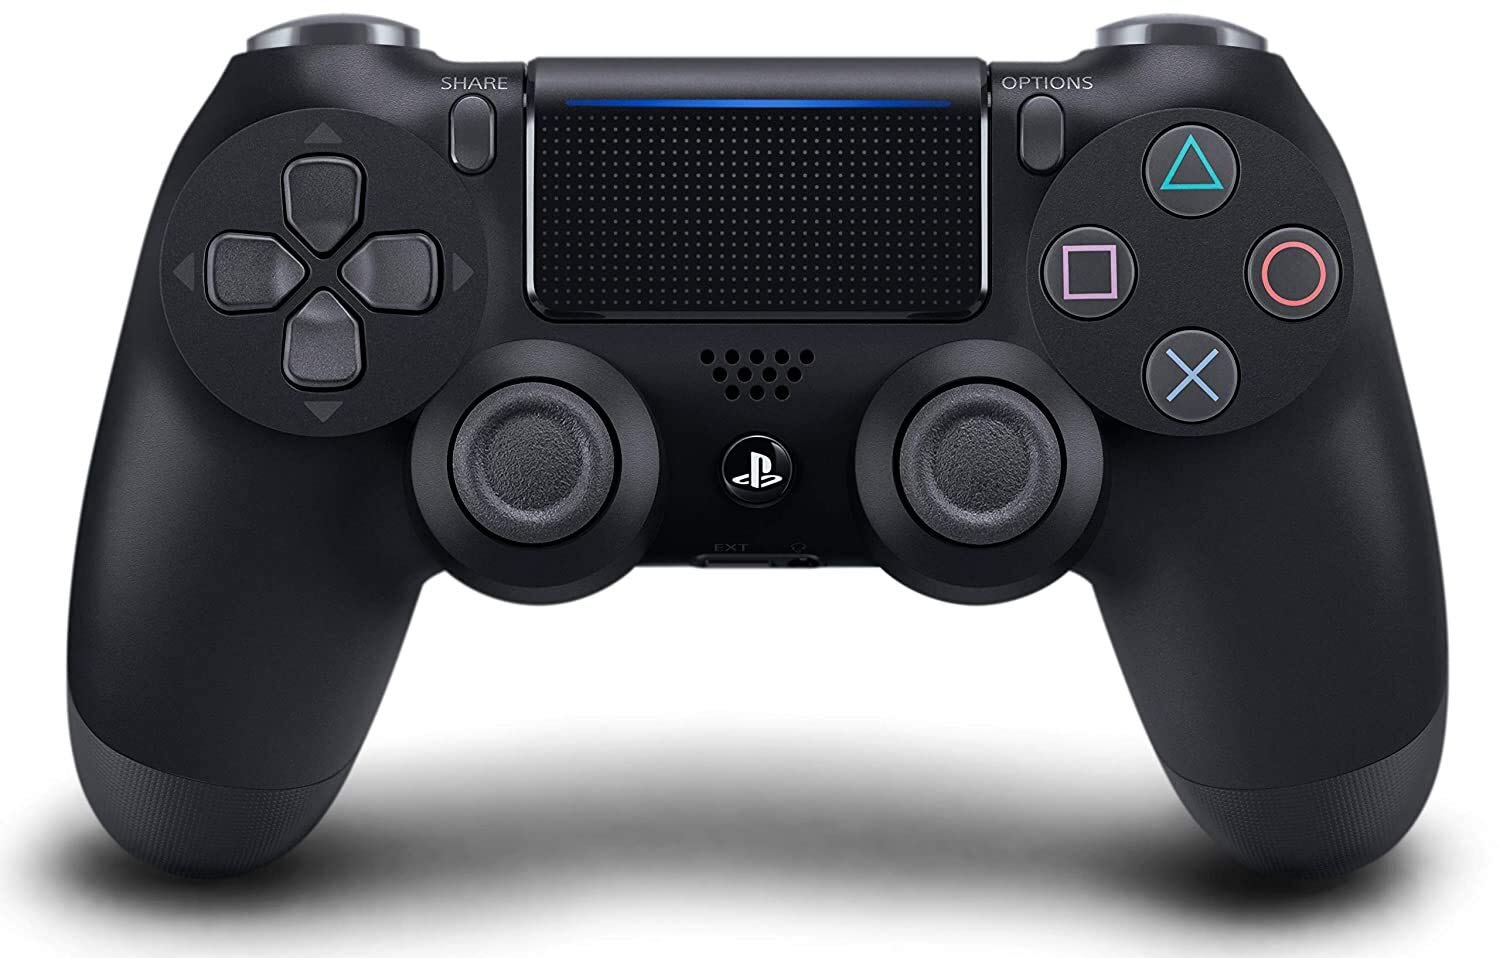 How To Reset A PS4 Controller